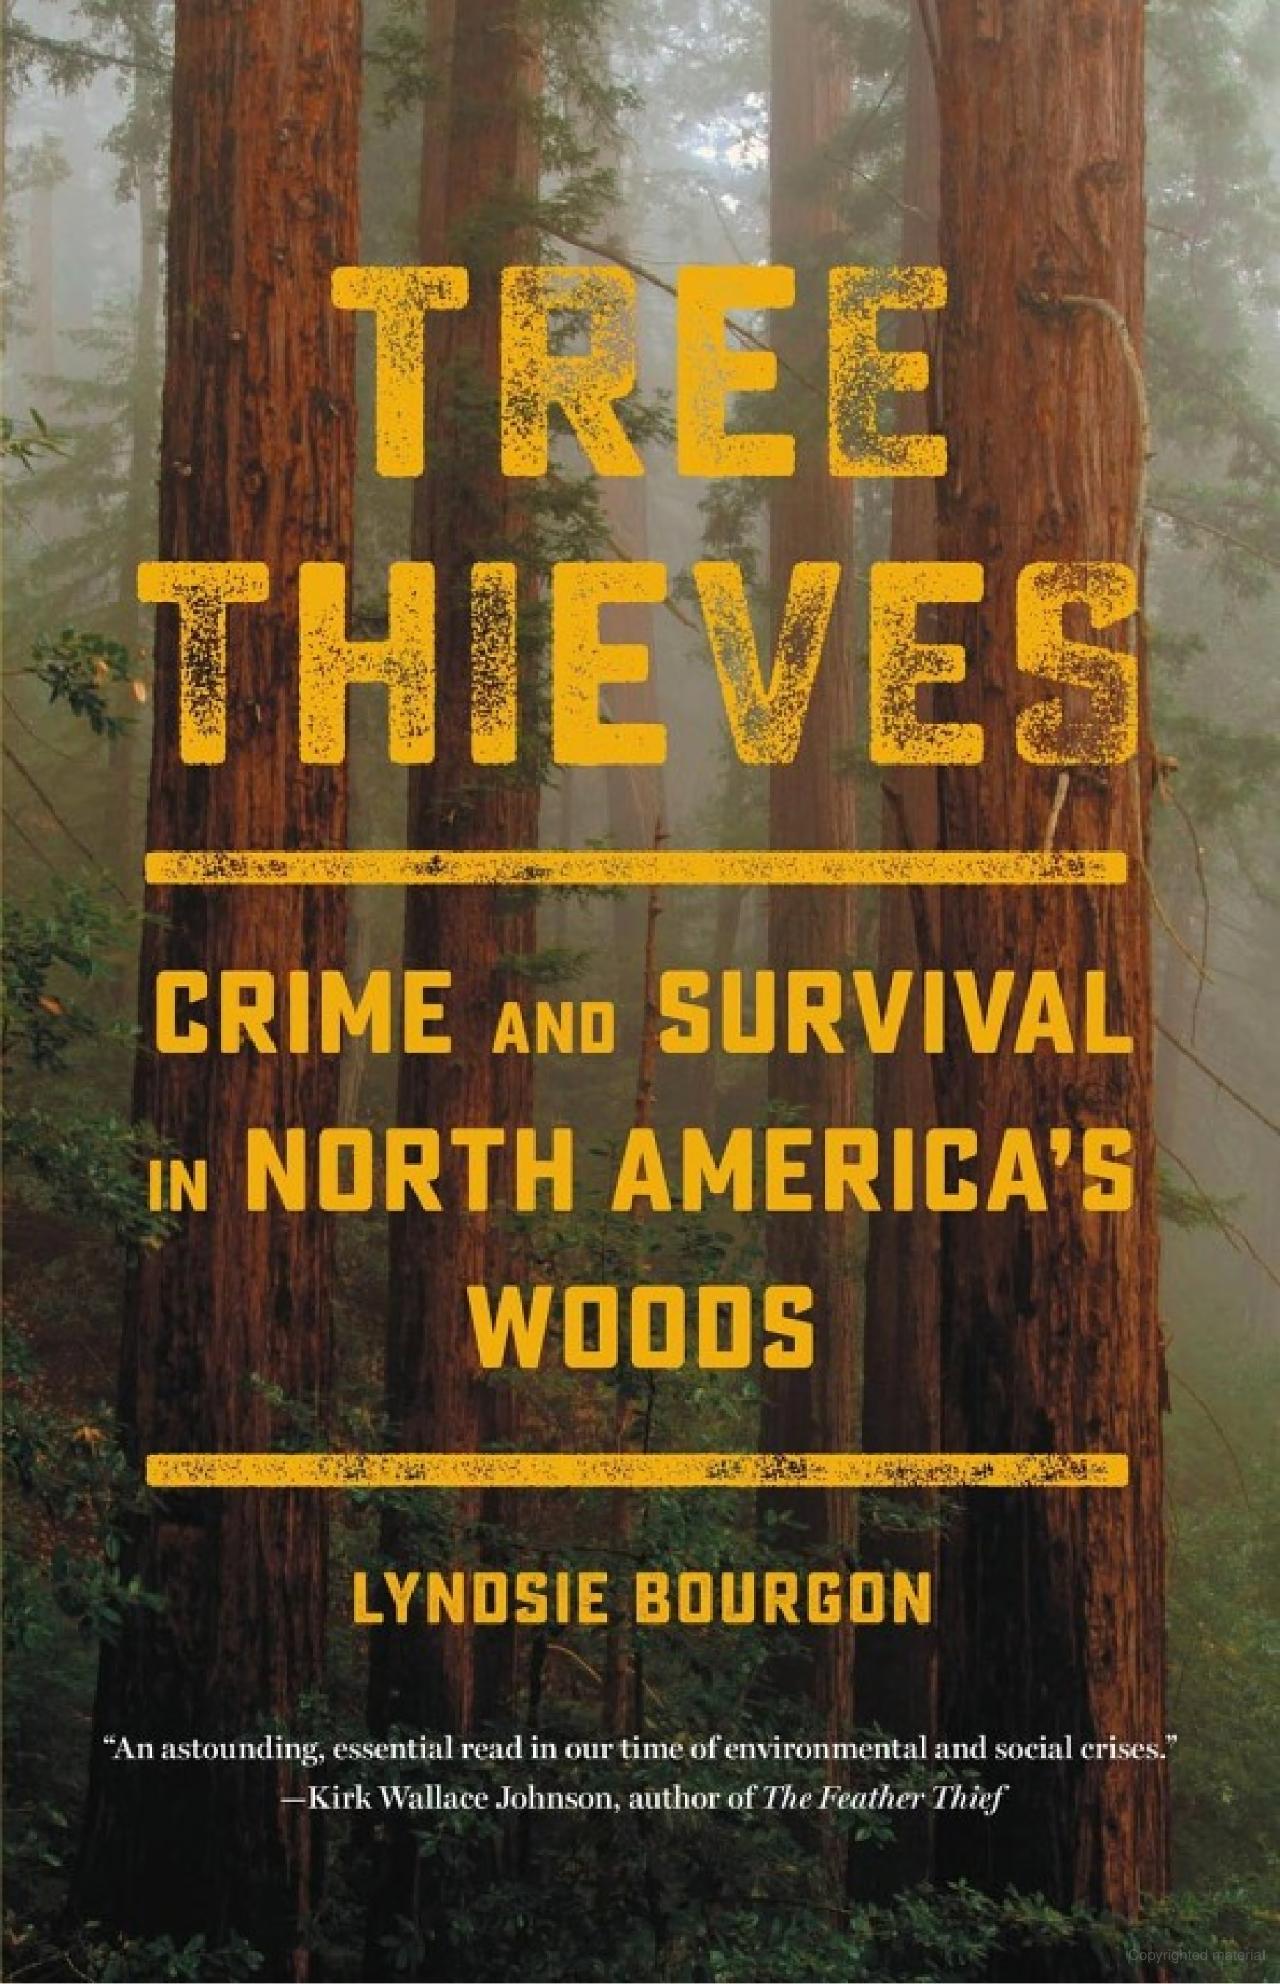 On Lyndsie Bourgon’s “Tree Thieves”